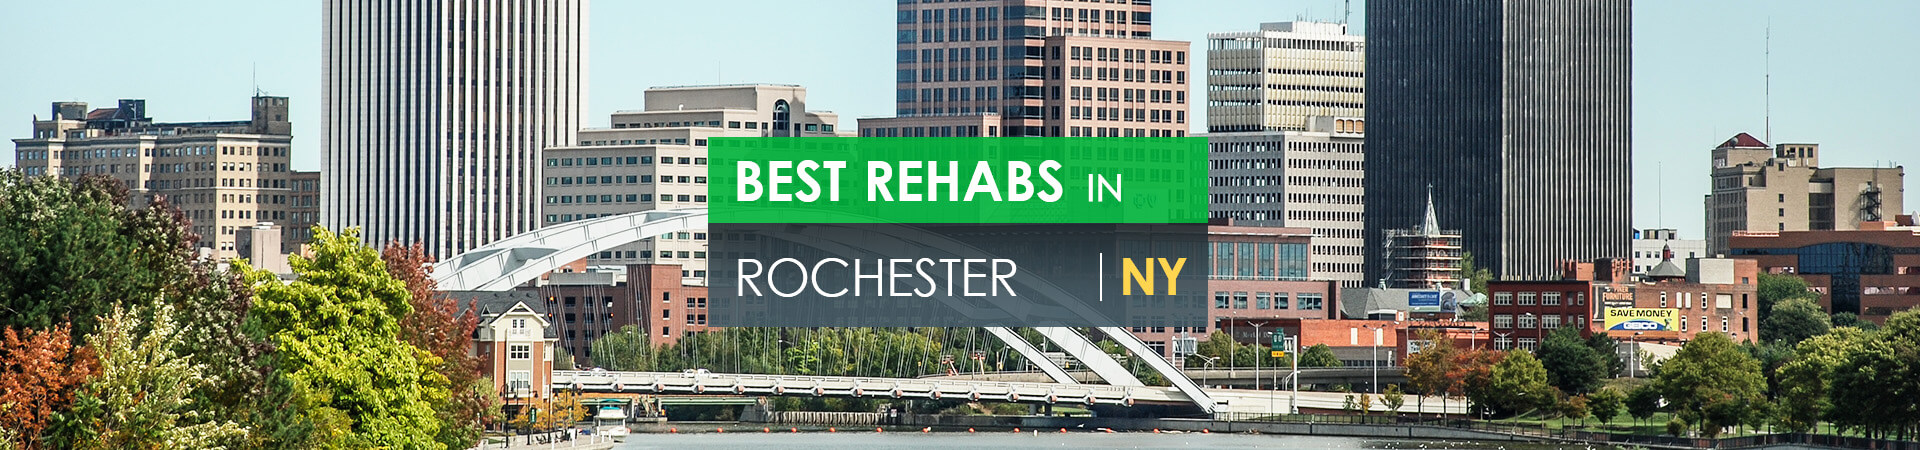 Best rehabs in Rochester, NY